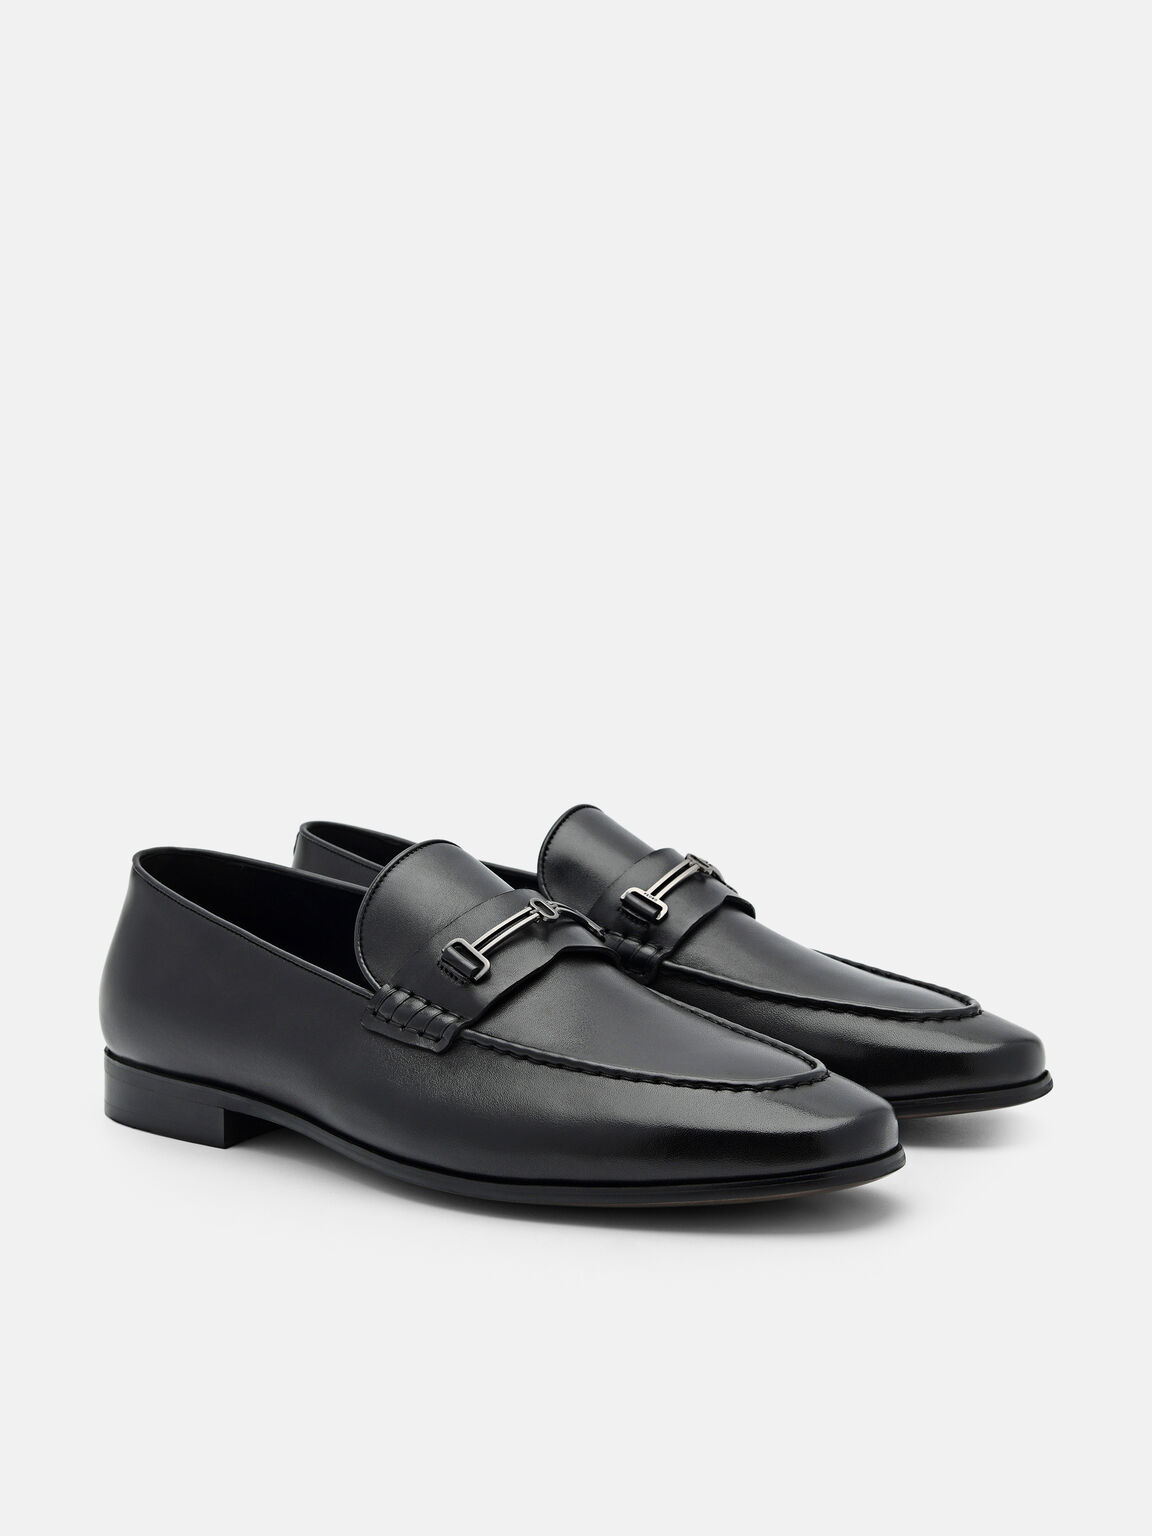 Anthony Leather Loafers, Black, hi-res